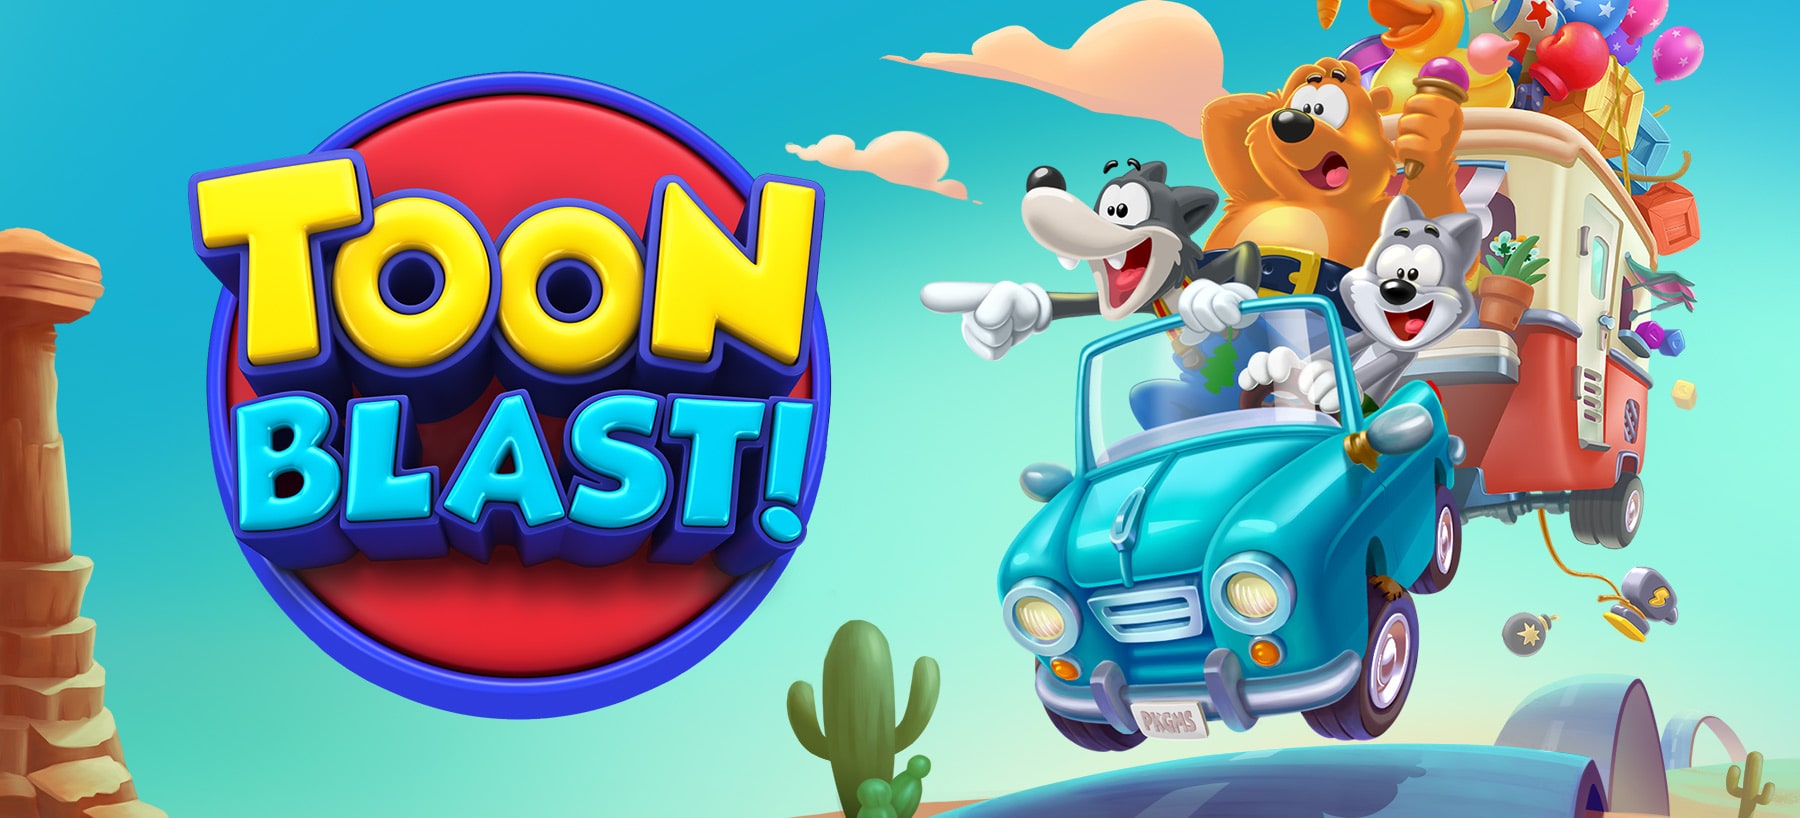 How to get free coins in Toon Blast